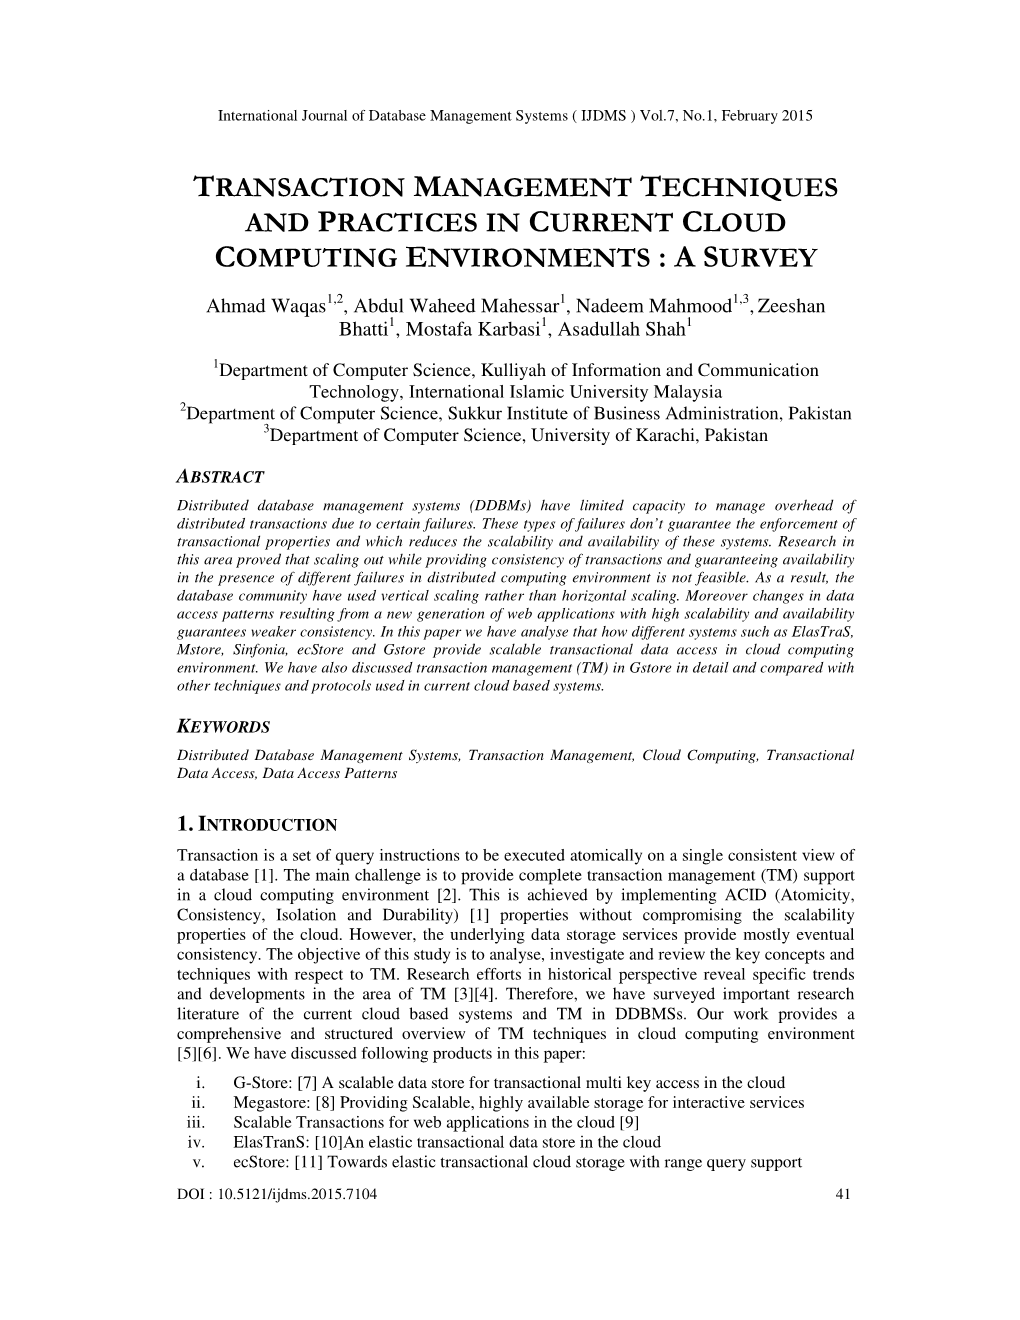 Transaction Management Techniques and Practices in Current Cloud Computing Environments : a S Urvey